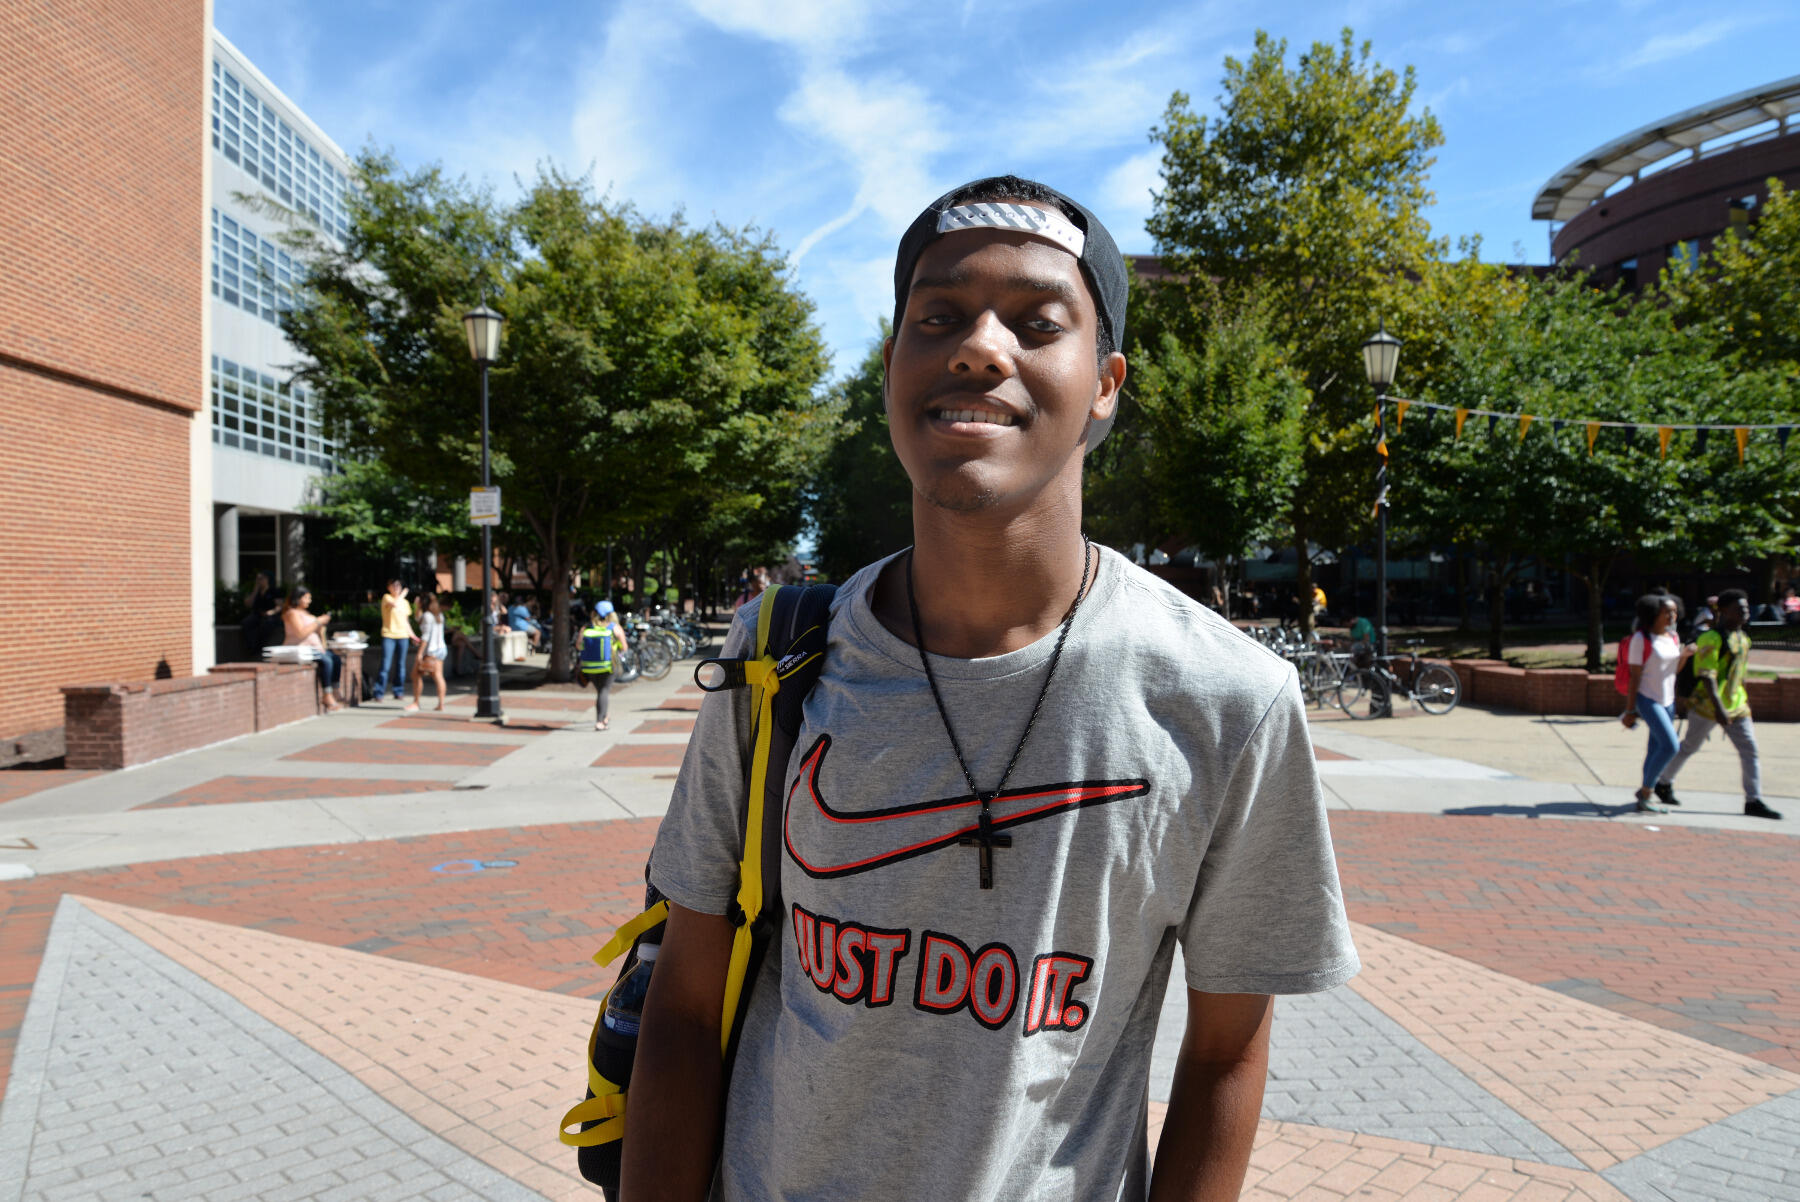 Curtis Robinson, an ACE-IT student from Richmond, is in his first year at VCU and is interested in pursuing a career in law enforcement and is working this semester as a VCU security guard.